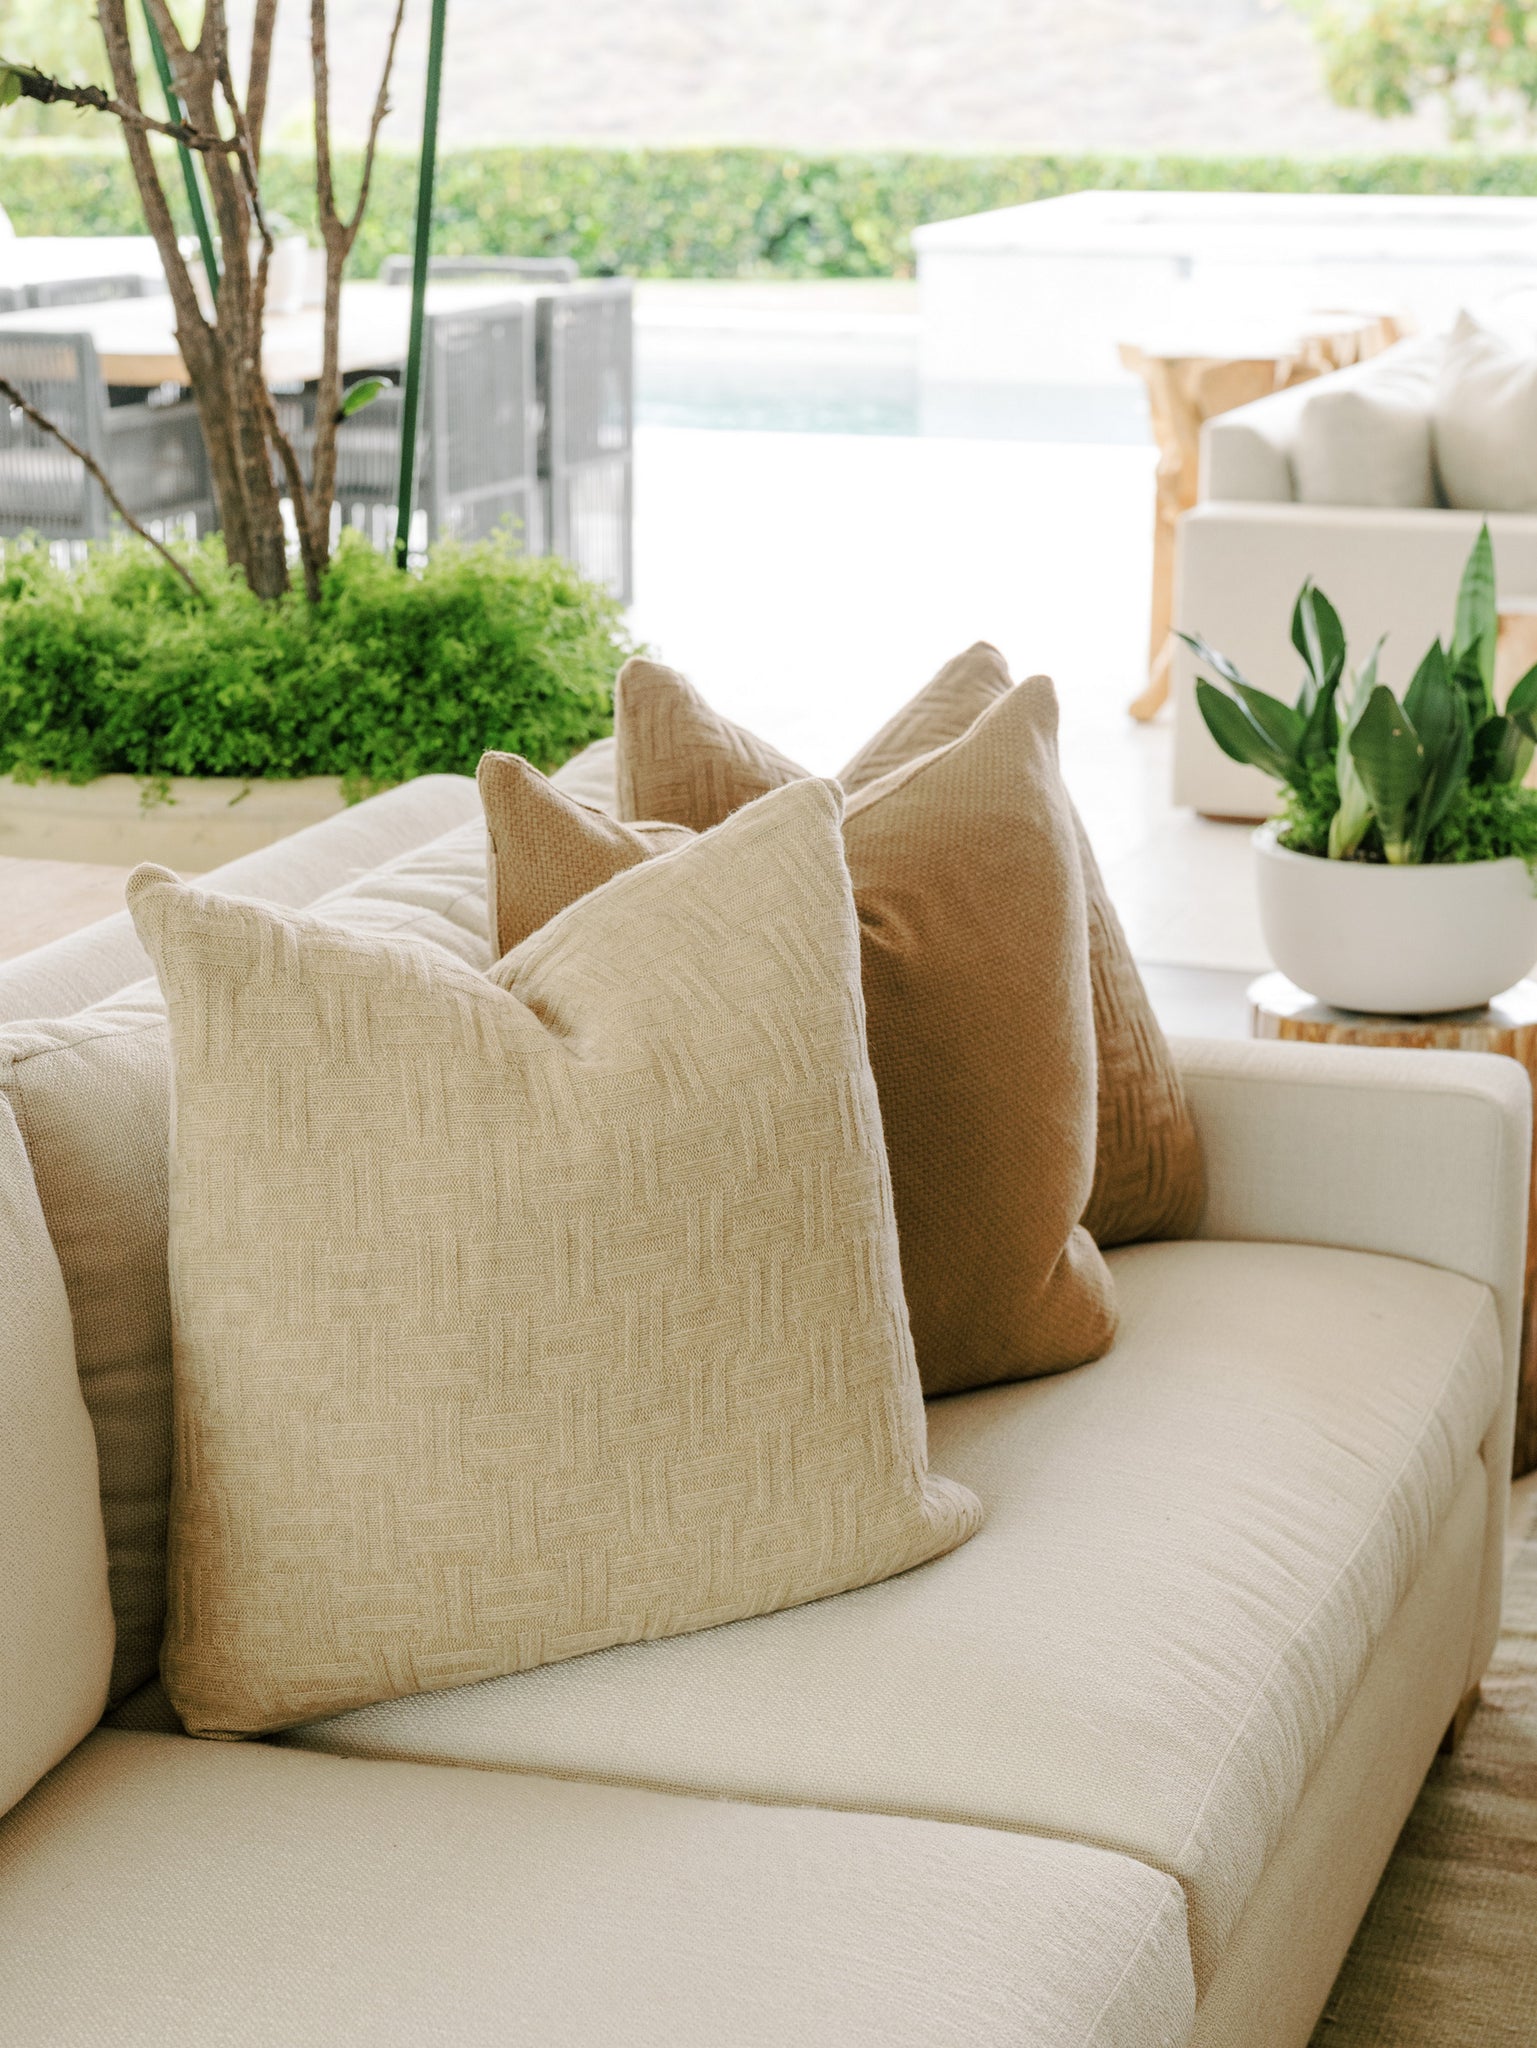 A cozy outdoor seating area with a mix of patio furniture and indoor chairs, adorned with cushions